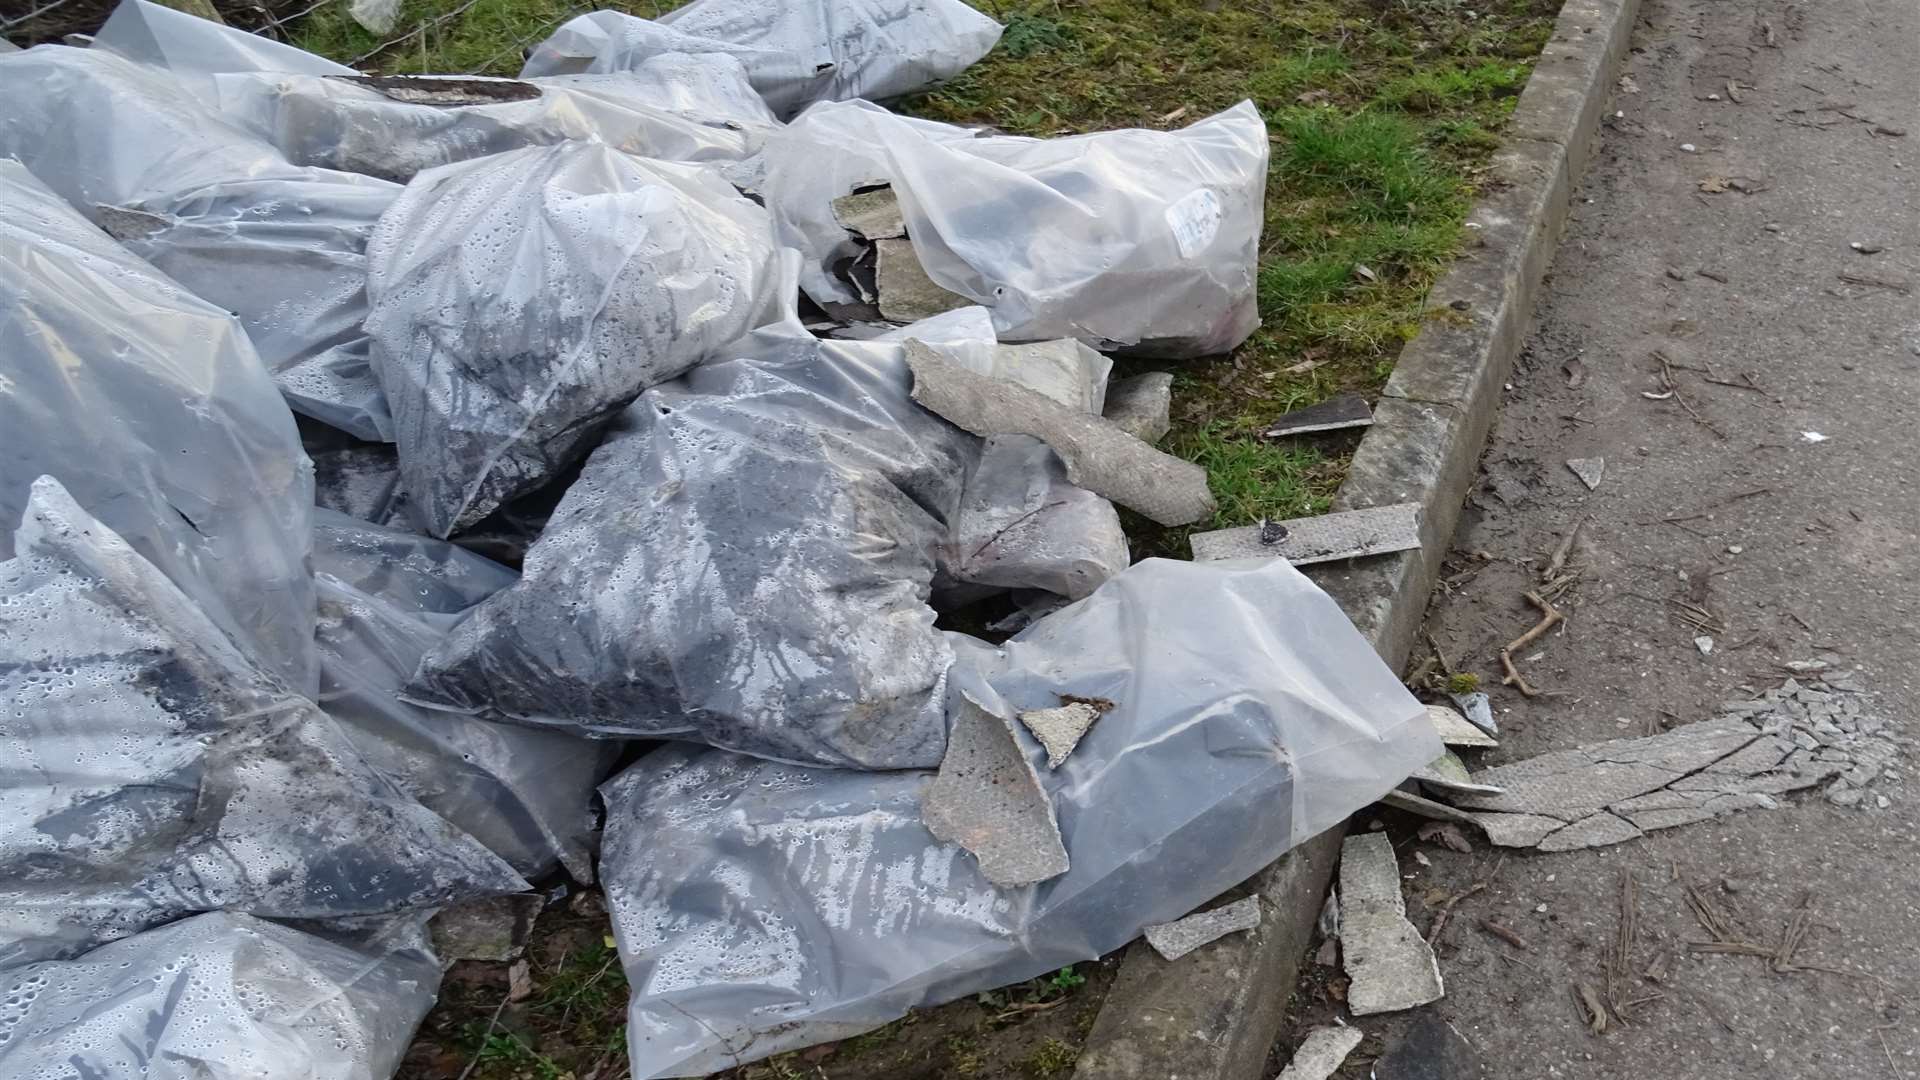 The bags fly-tipped near Gallagher Retail Park